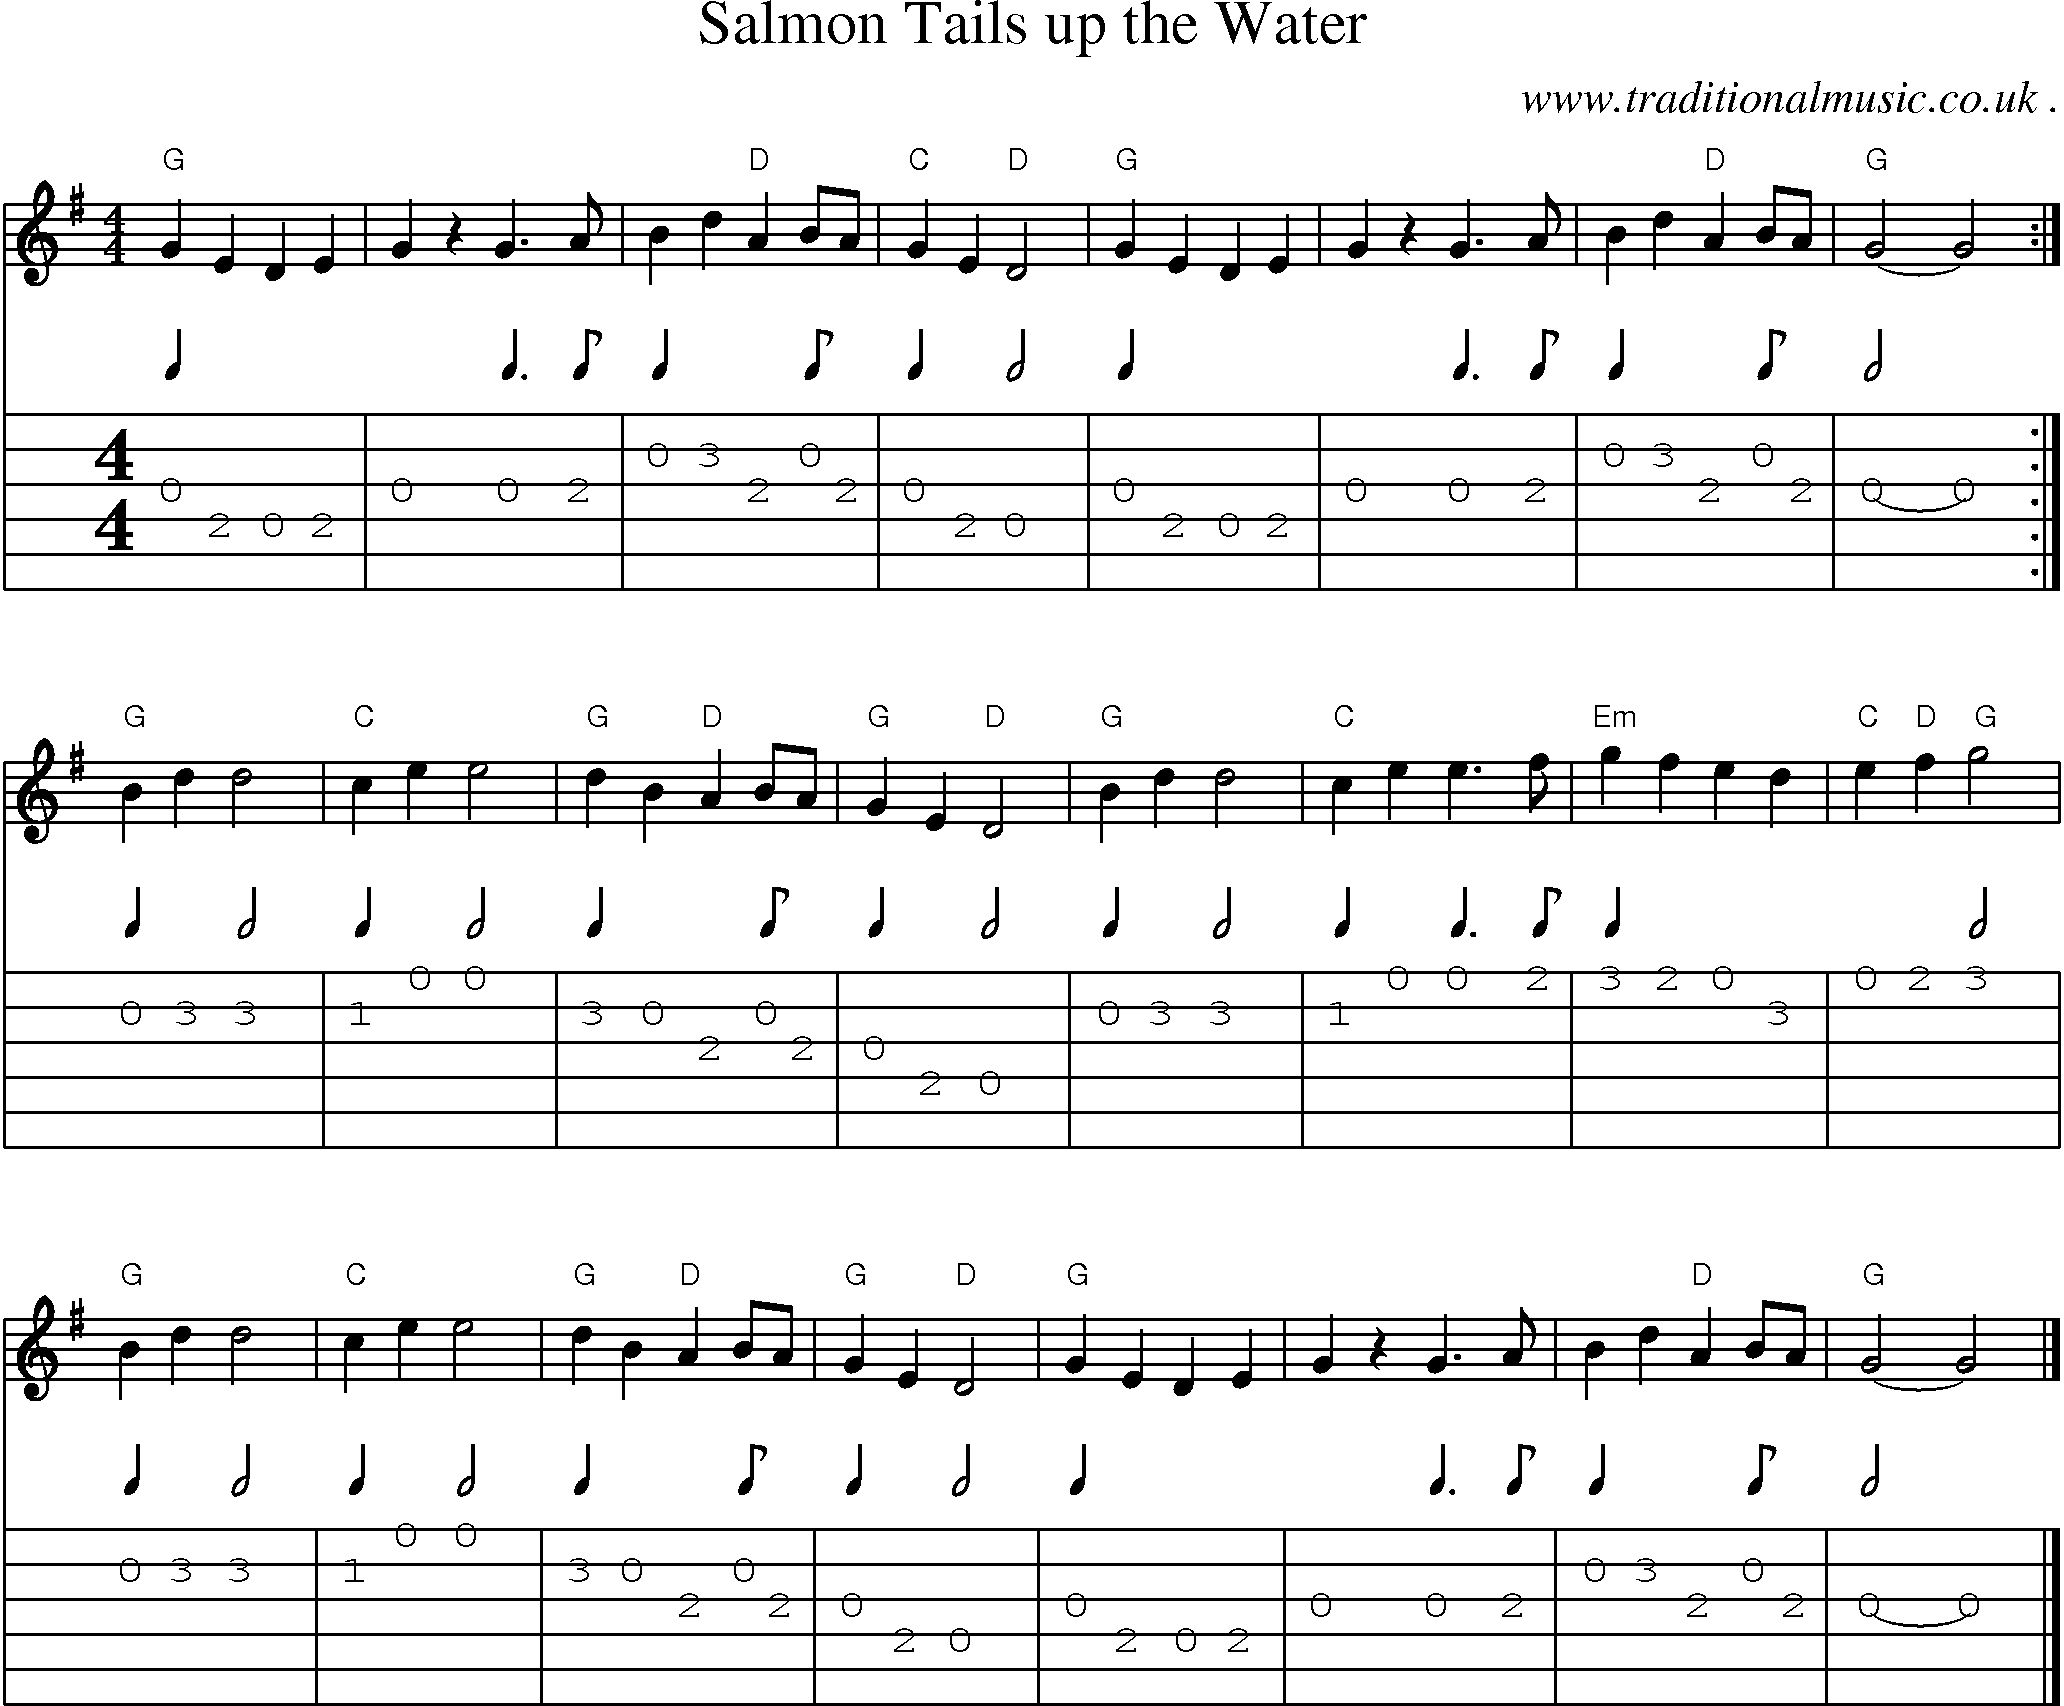 Music Score and Guitar Tabs for Salmon Tails up the Water